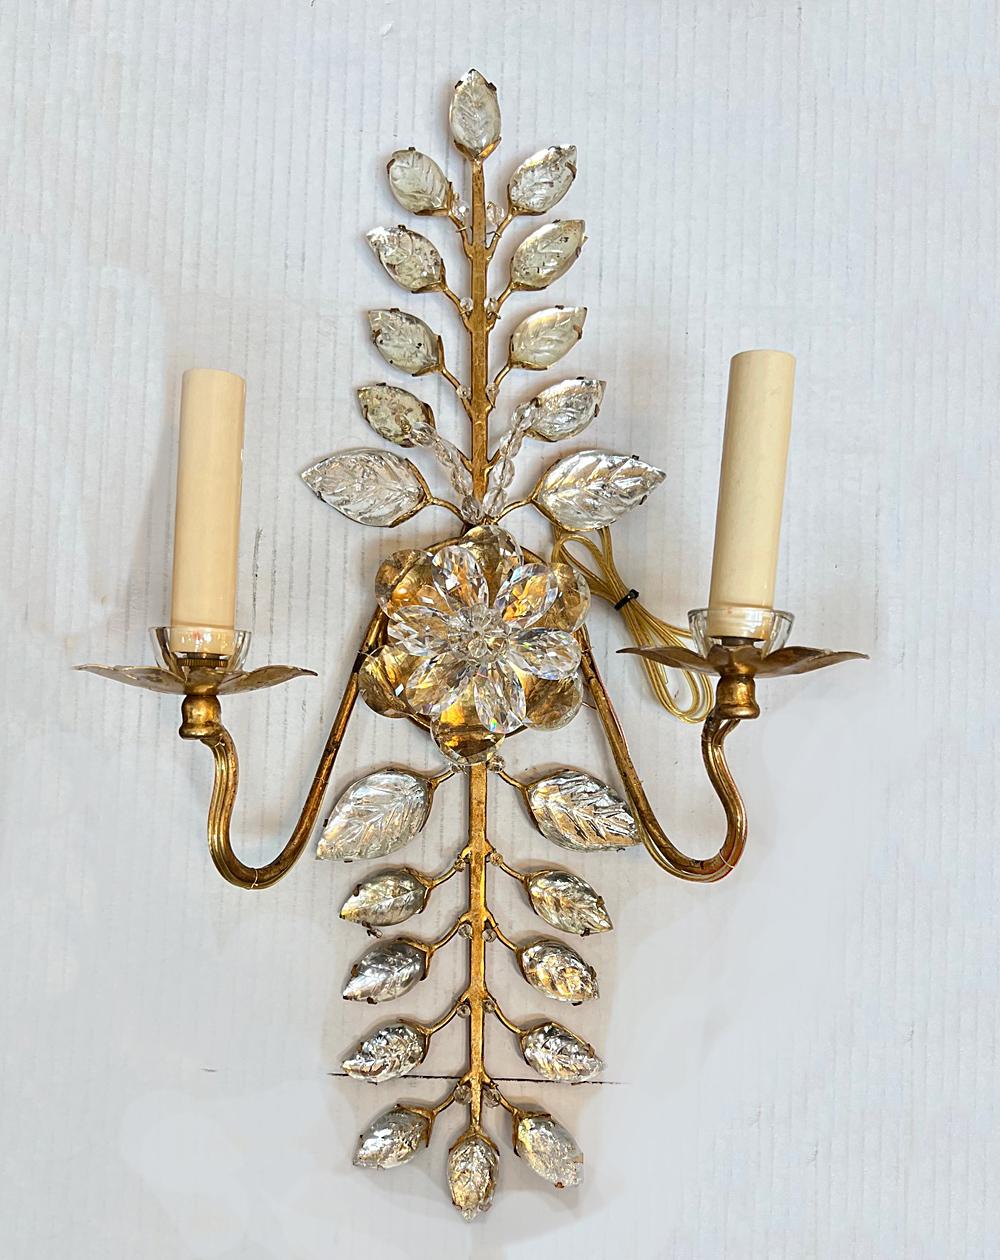 Set of circa 1940's French gilt metal sconces with molded glass leaves and crystal flowers. Sold in Pairs

Measurements:
Height: 20